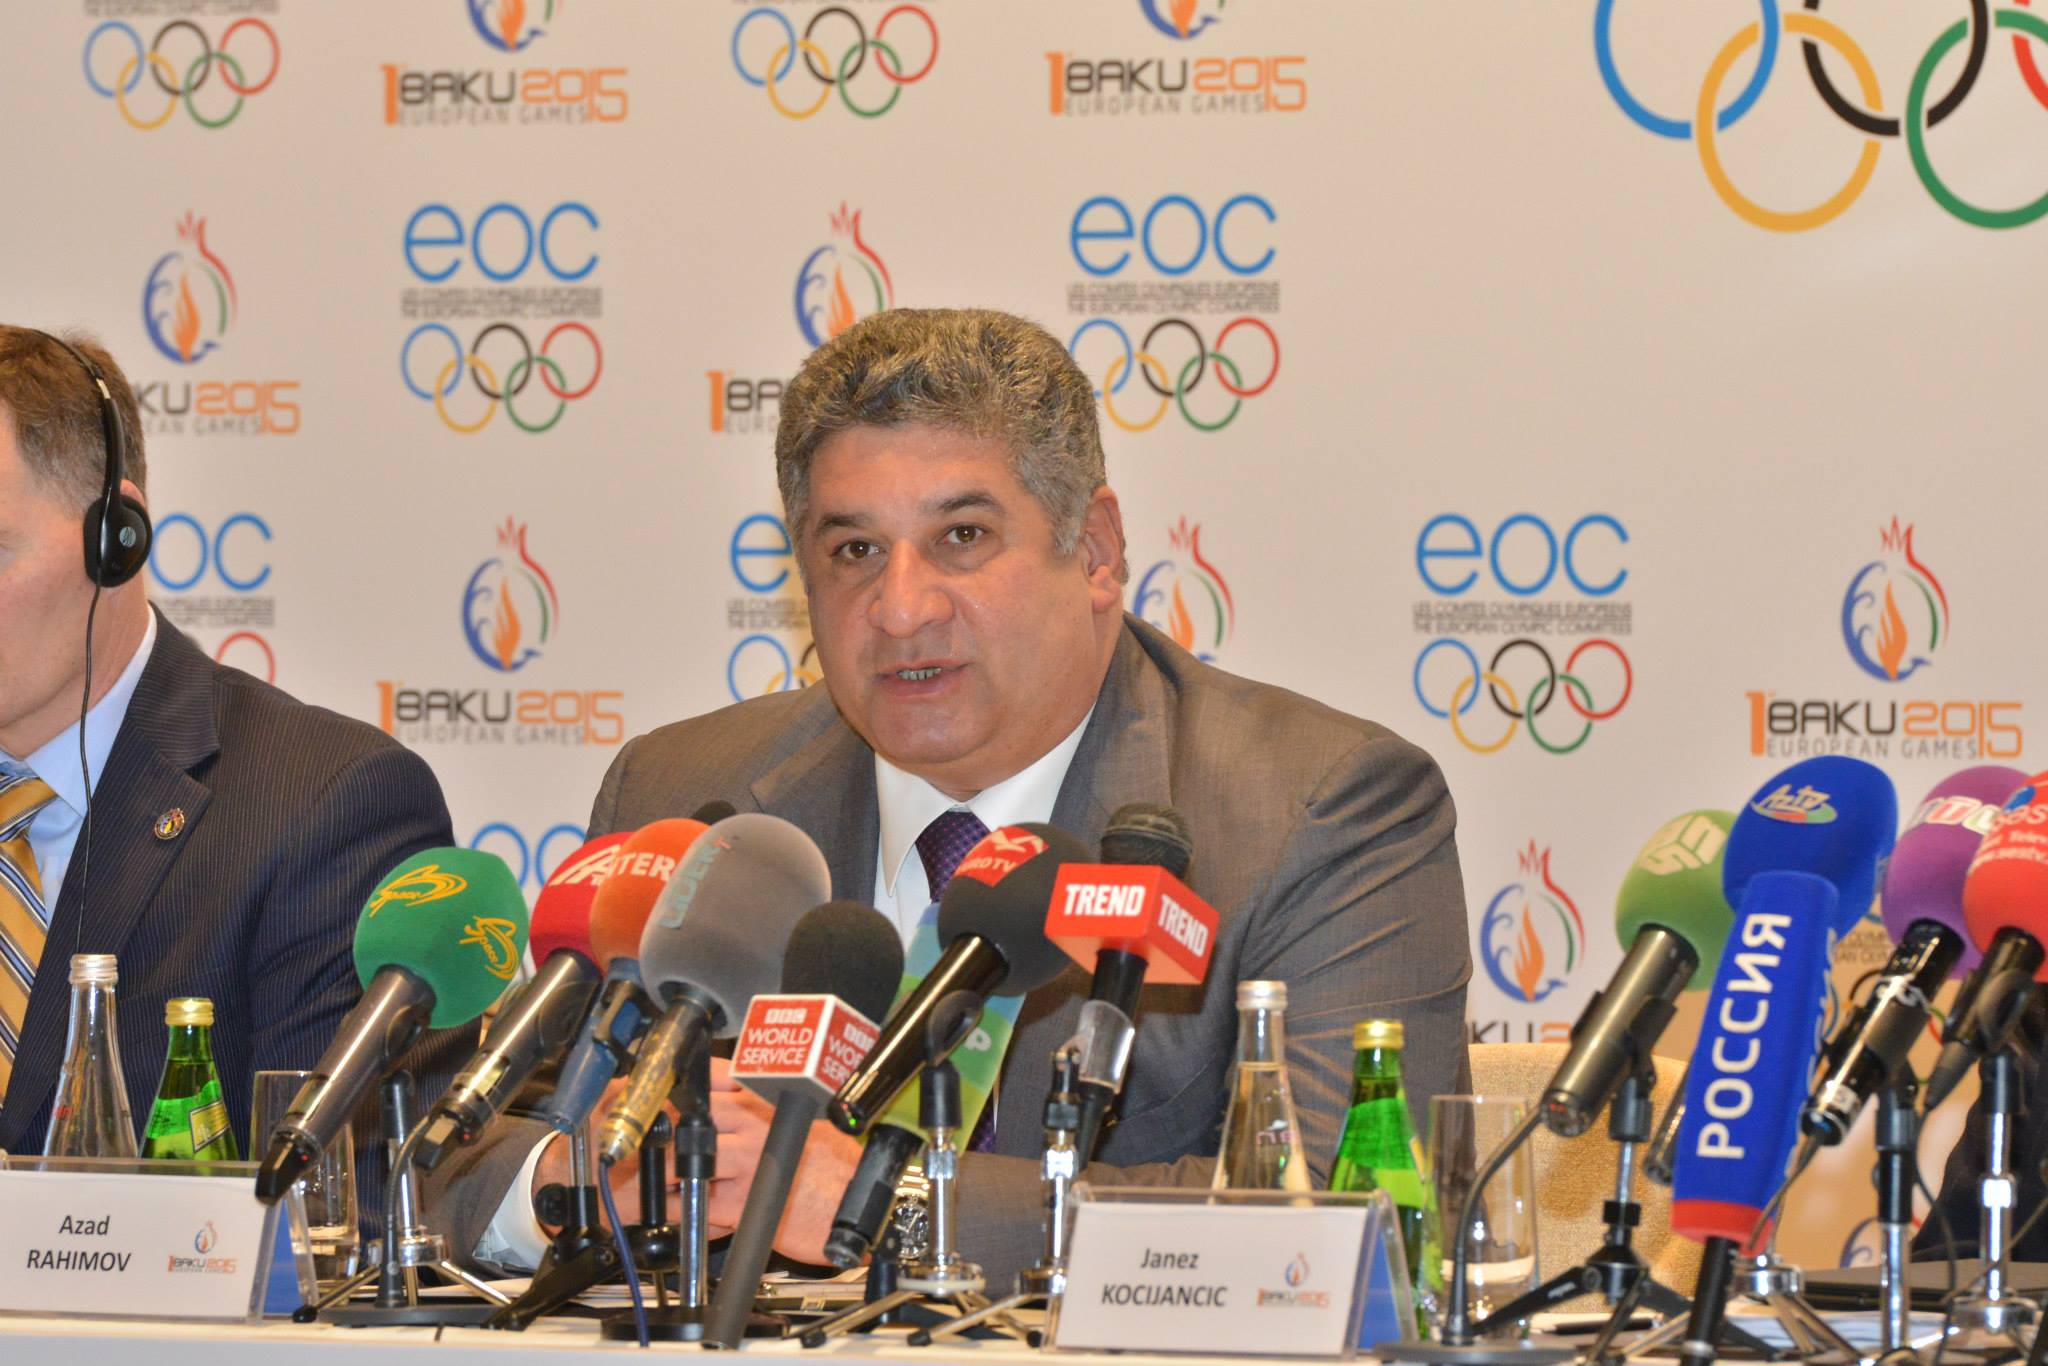 Azerbaijan's Minister of Youth and Sports and Baku 2015 chief executive Azad Rahimov is among those excited by the launch of the Academy ©Baku 2015